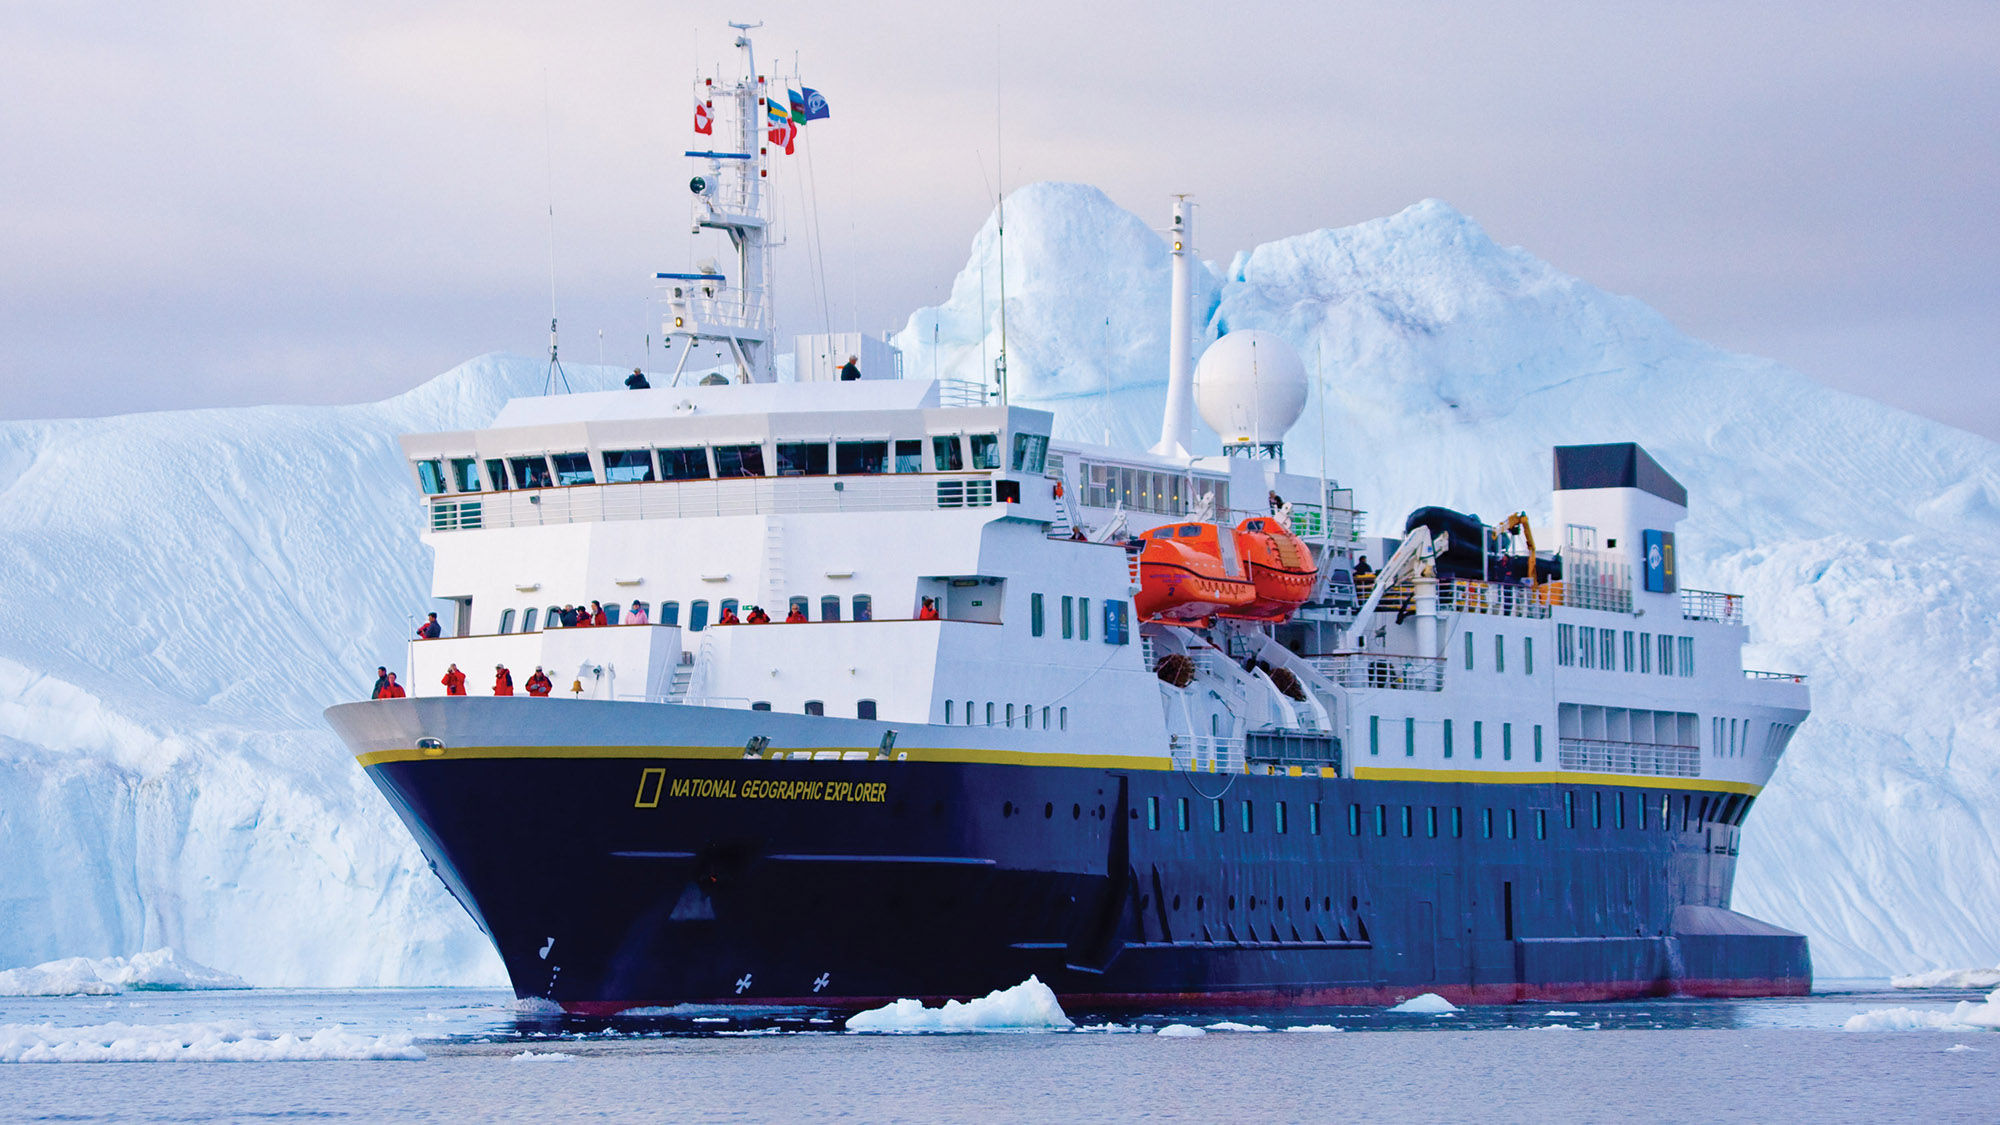 Lindblad's National Geographic Explorer will circumnavigate Iceland this year and next.